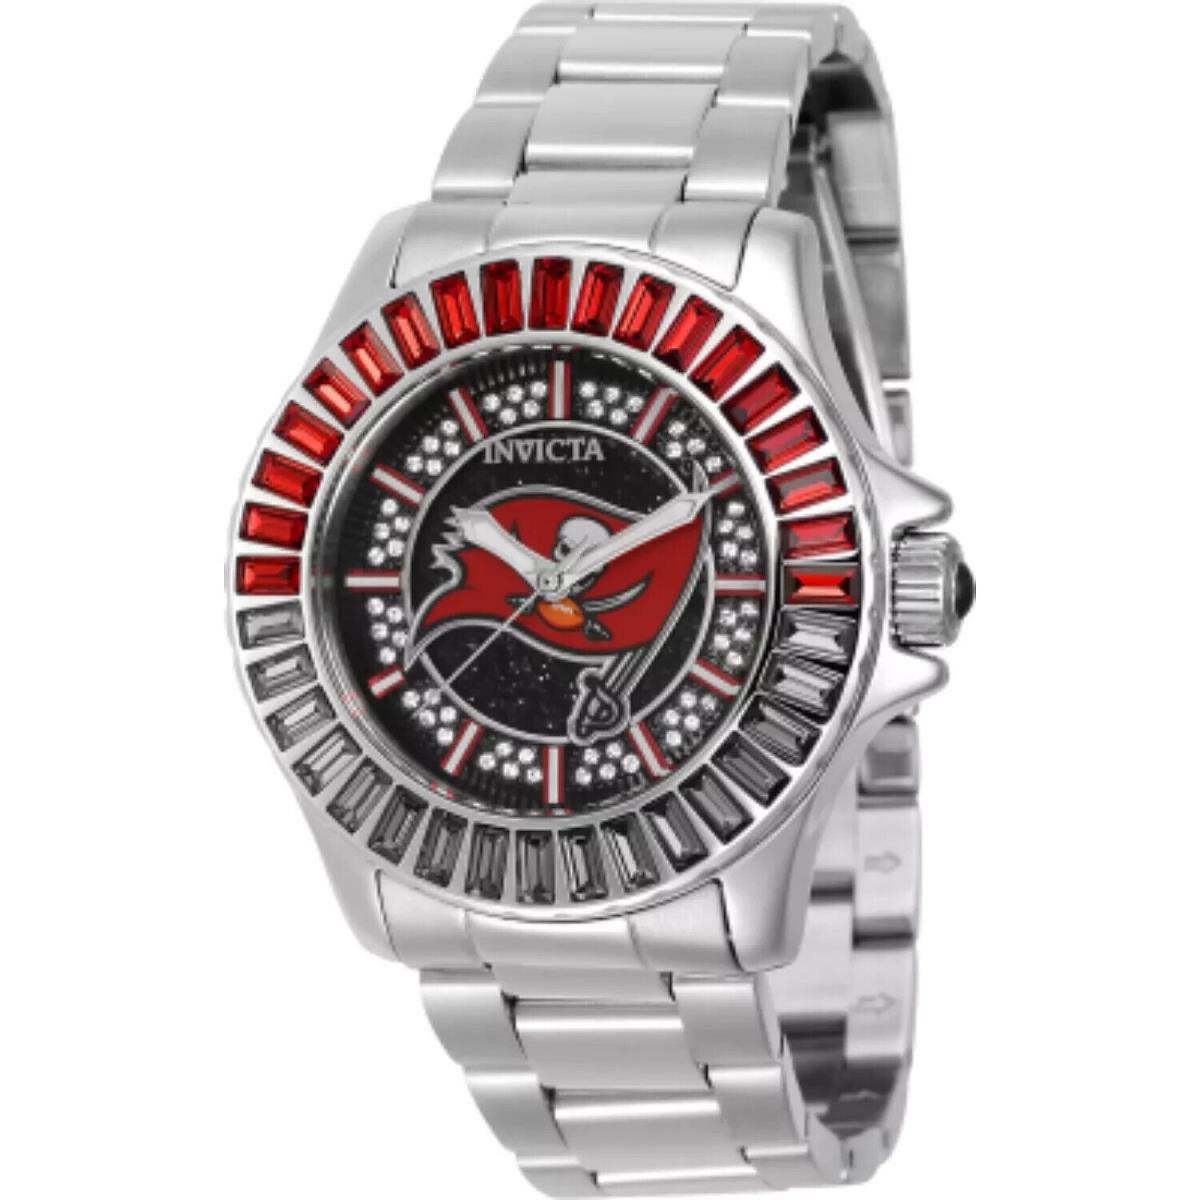 Invicta Nfl Tampa Bay Bucs Women`s 38mm Crystal Accent Quartz Watch 42058 - Dial: Silver, Band: Silver, Bezel: Silver